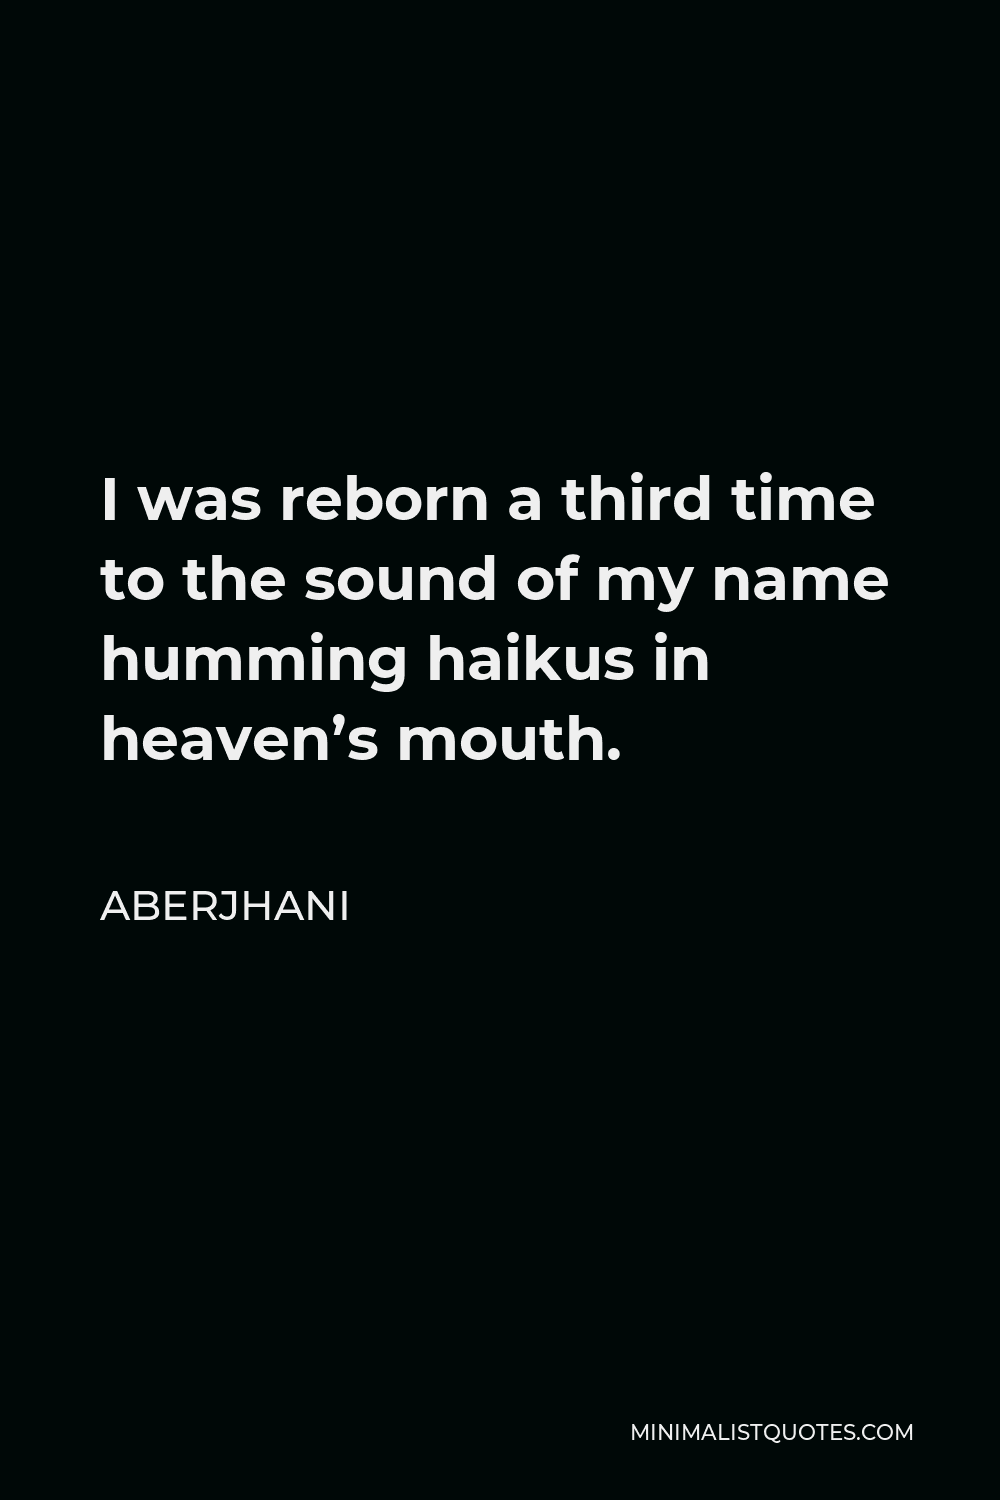 Aberjhani Quote - I was reborn a third time to the sound of my name humming haikus in heaven’s mouth.